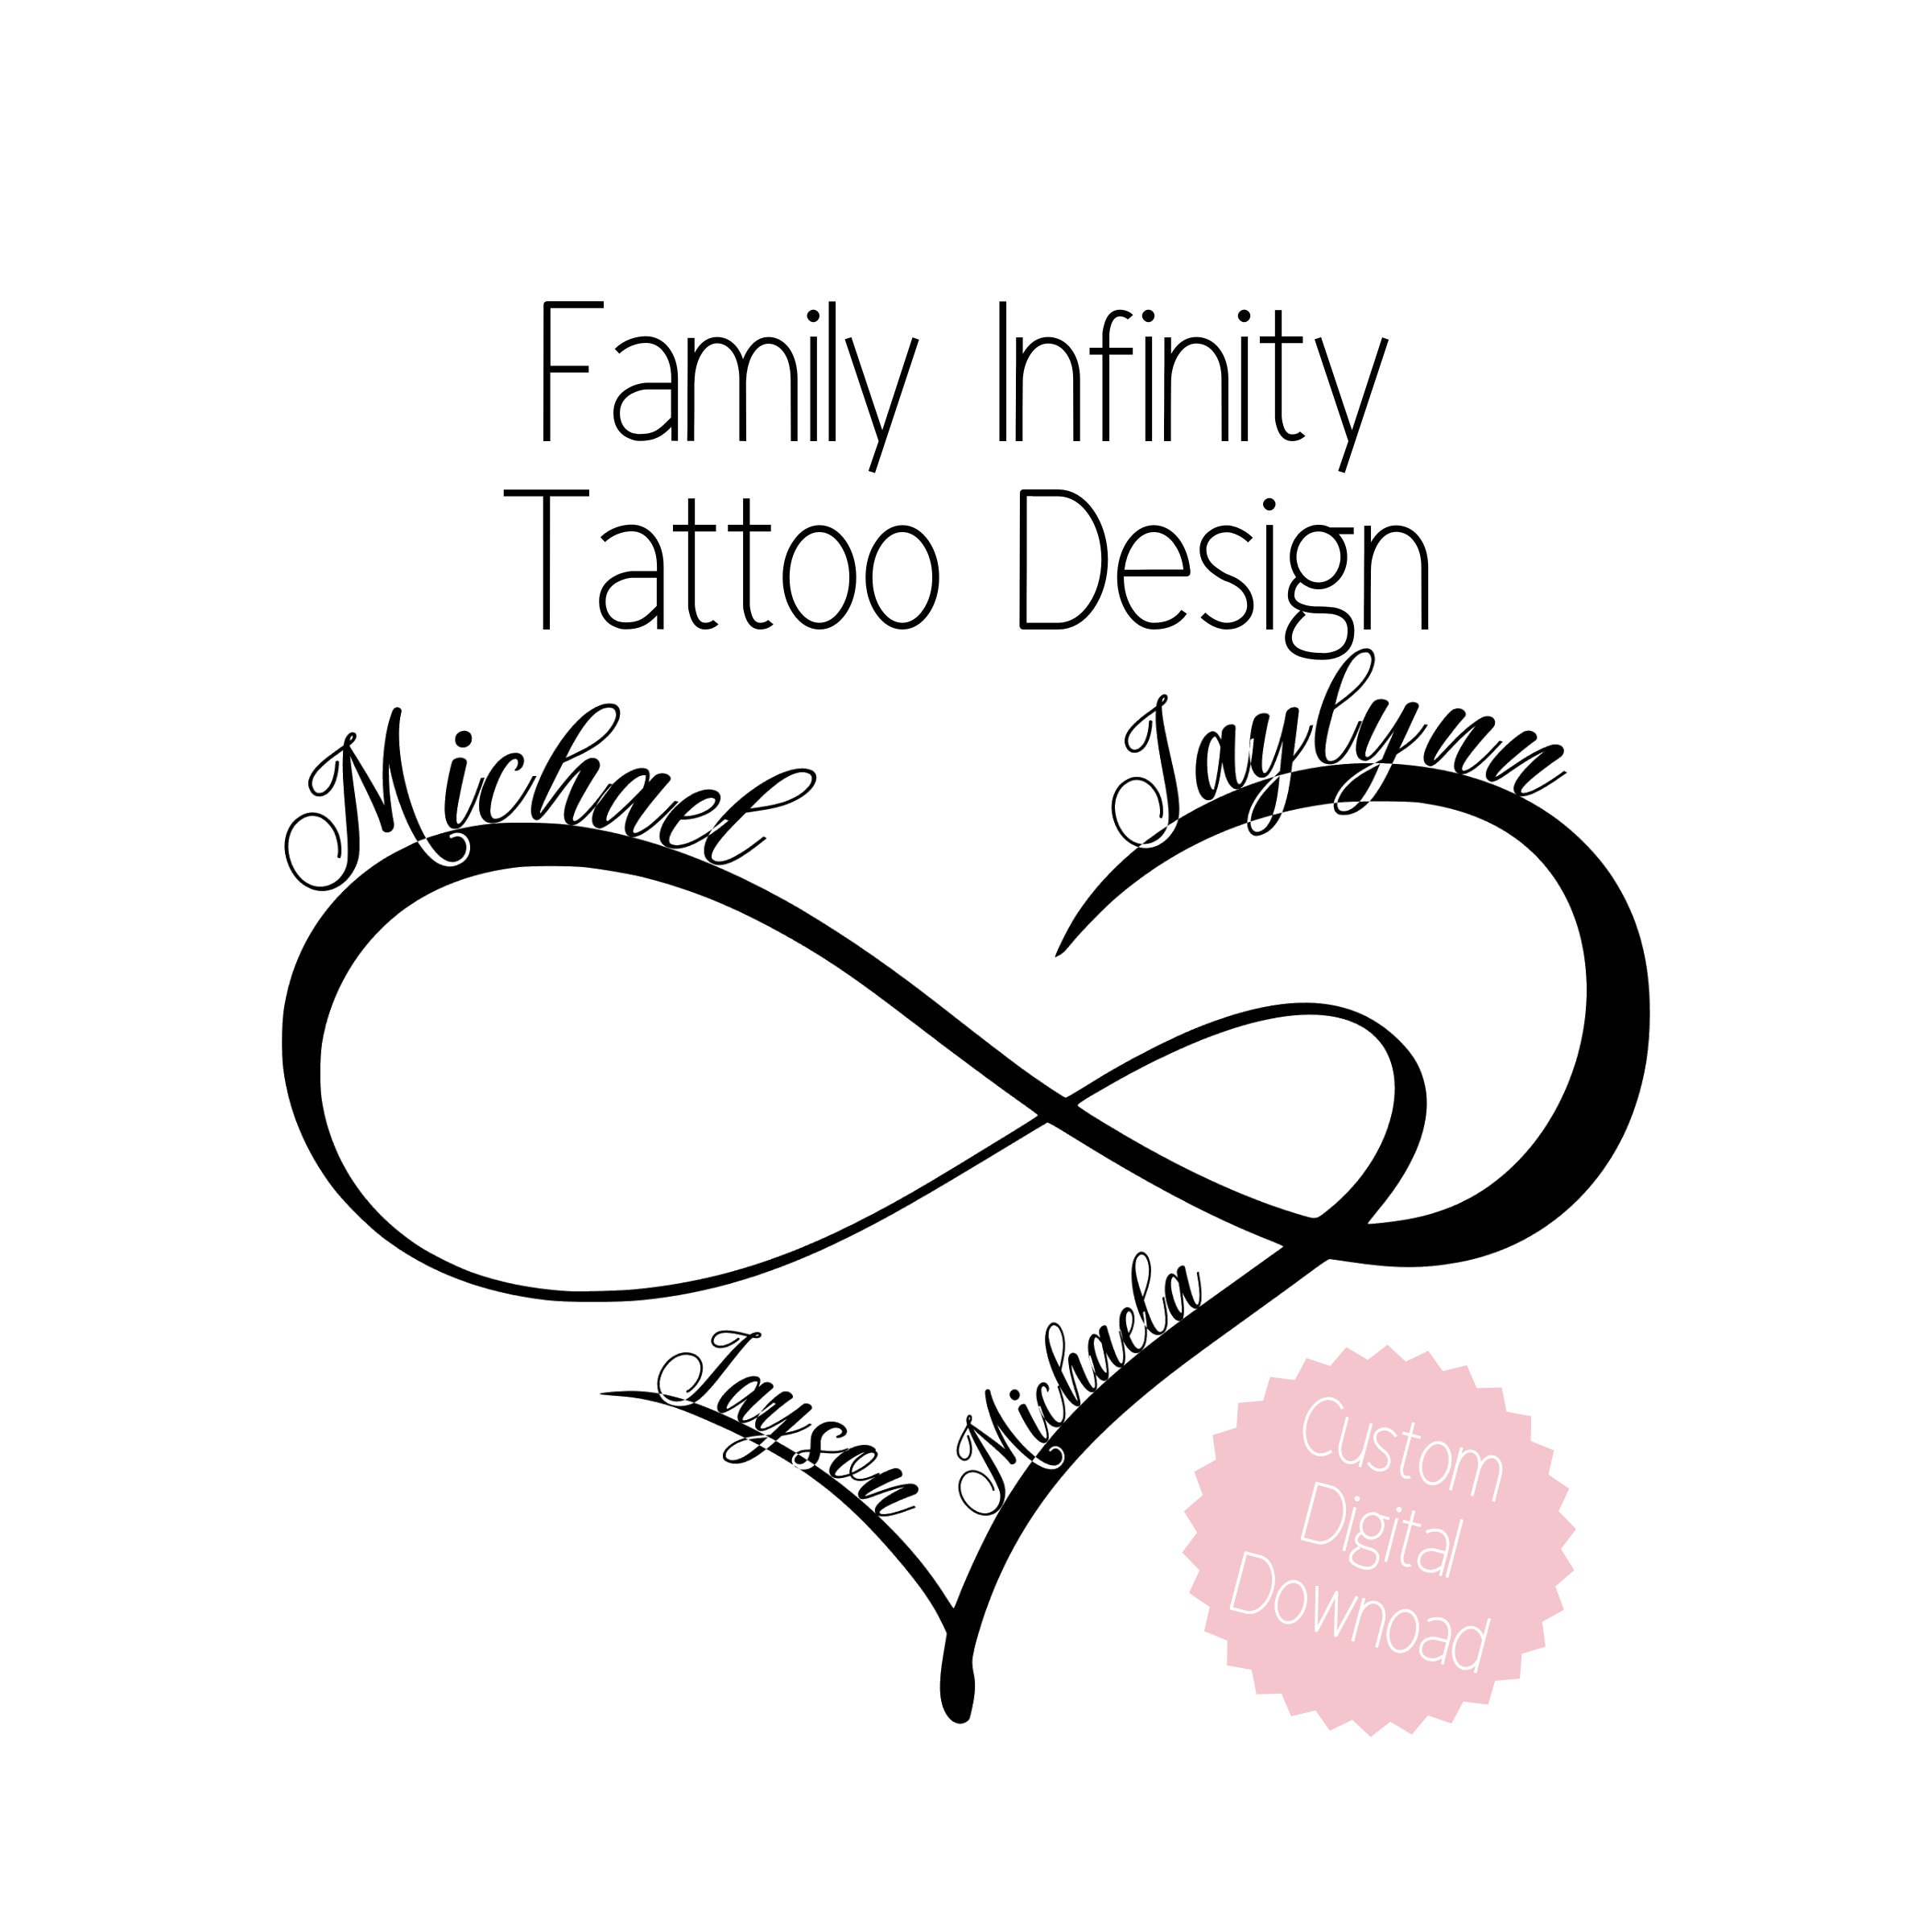 160+ Infinity Tattoo With Names, Dates, Symbols And More (For Women) | Infinity  tattoo designs, Feather tattoo design, Infinity tattoos